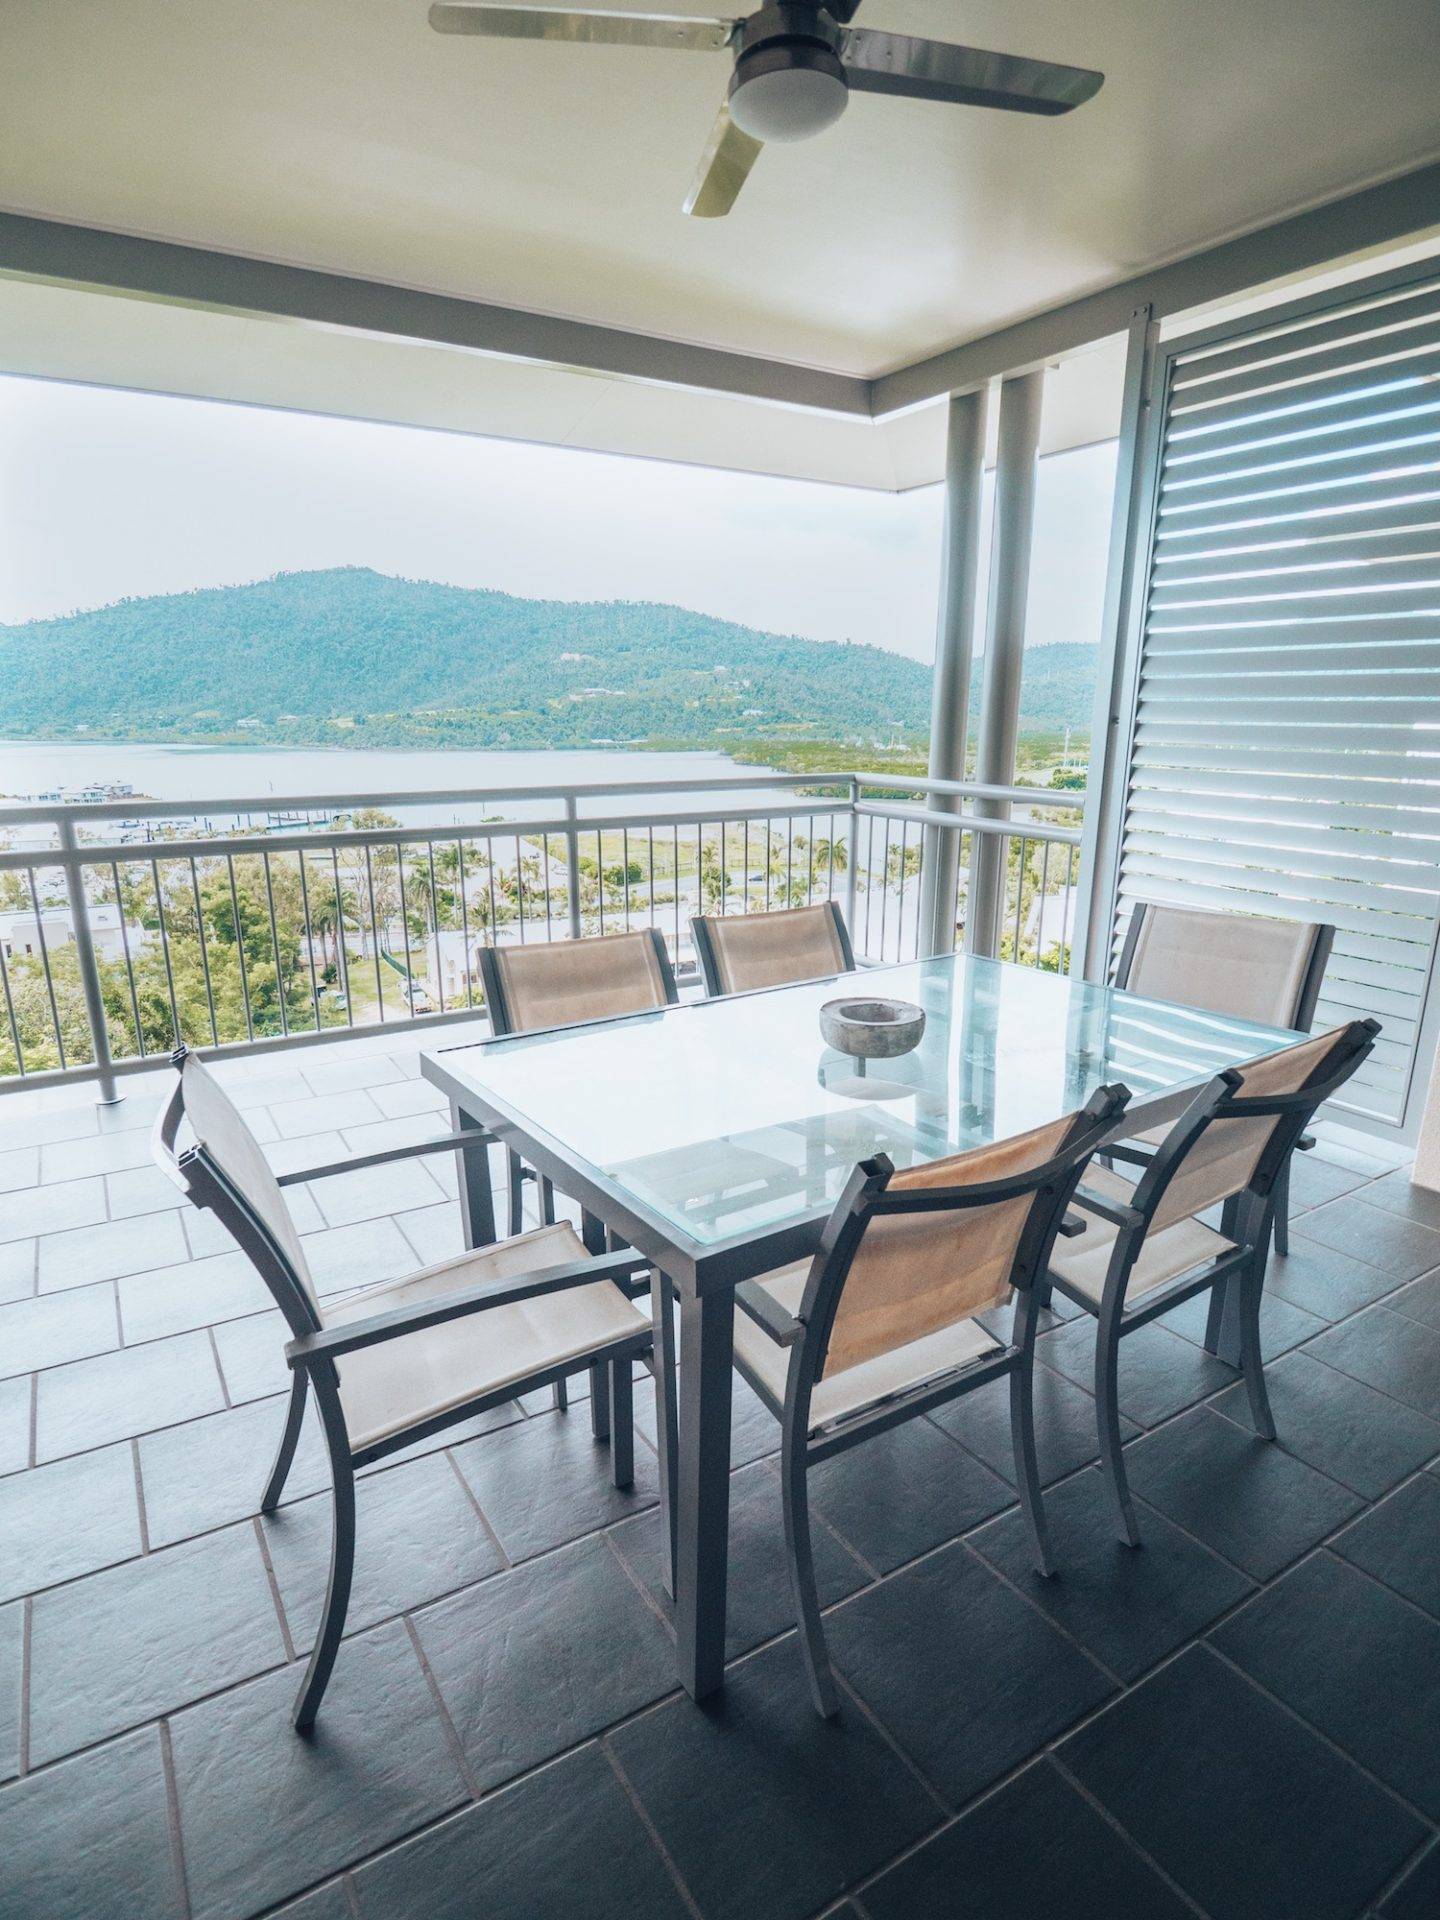 Our two bedroom suite at Peppers Airlie Beach in the Whitsunday Islands featured a spacious patio with a view of Airlie Beach below.